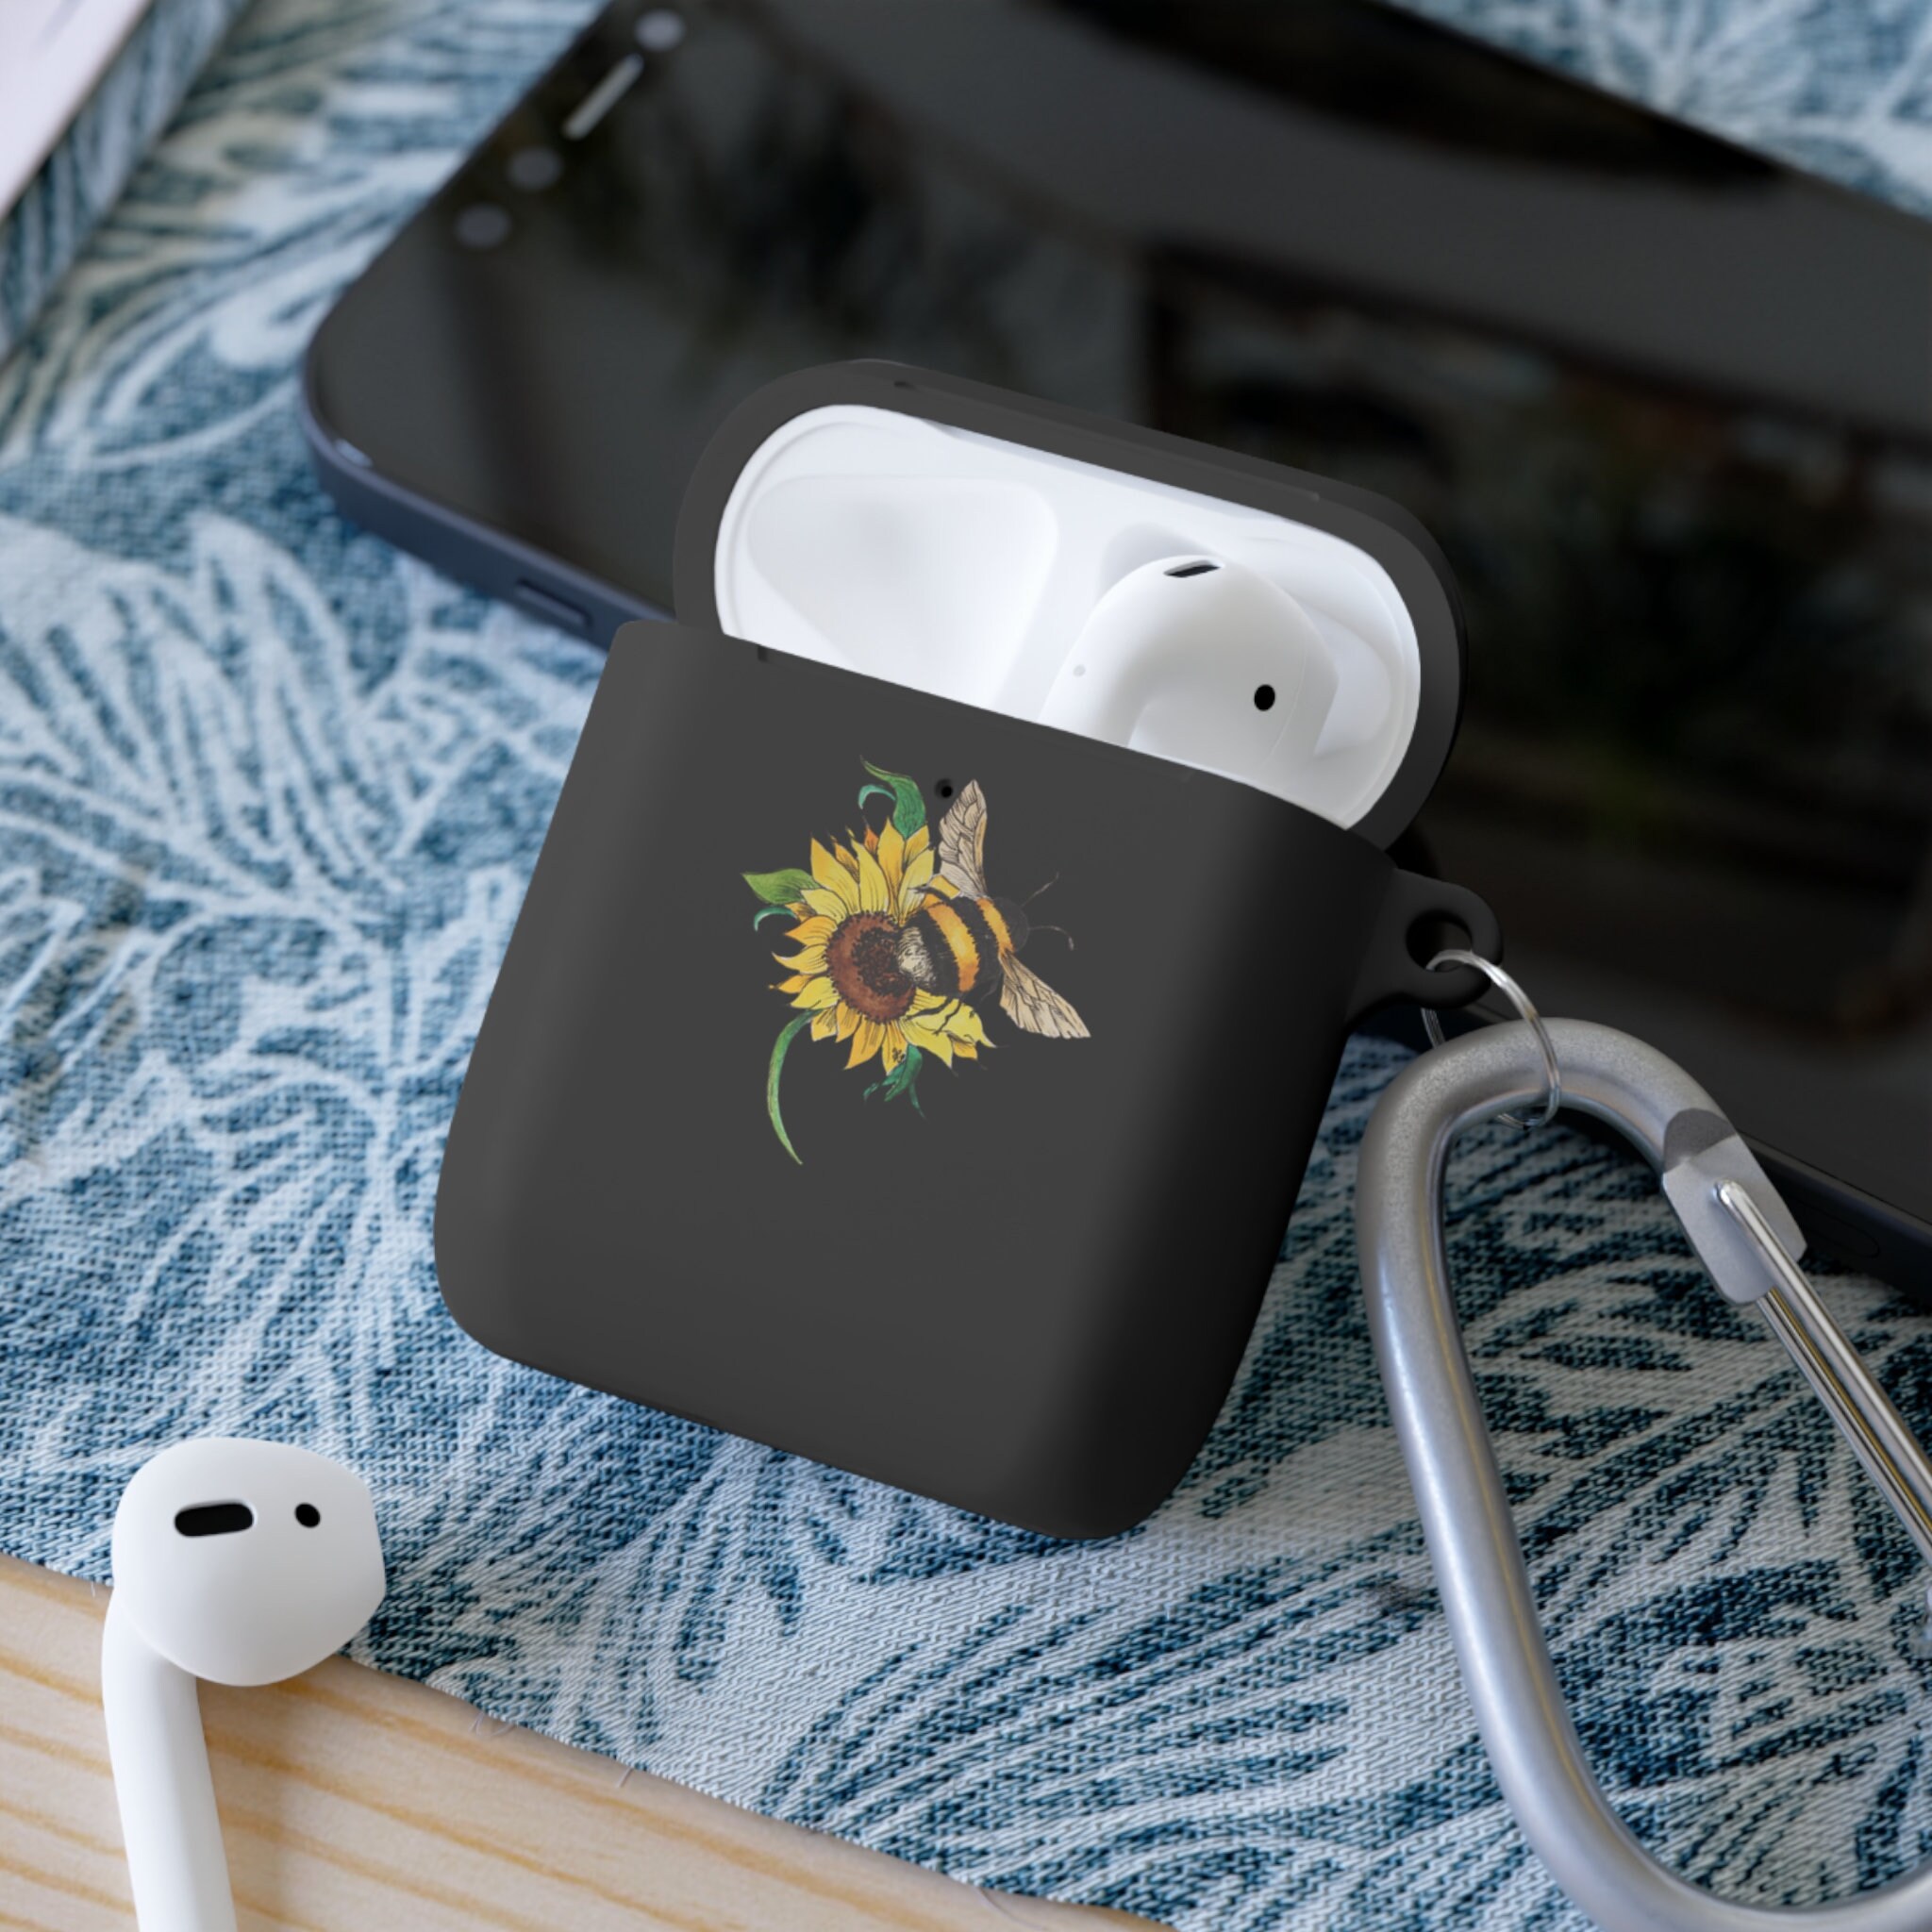 50+ Best AirPods Pro & Max Engraving Ideas (Cute, Funny & More)